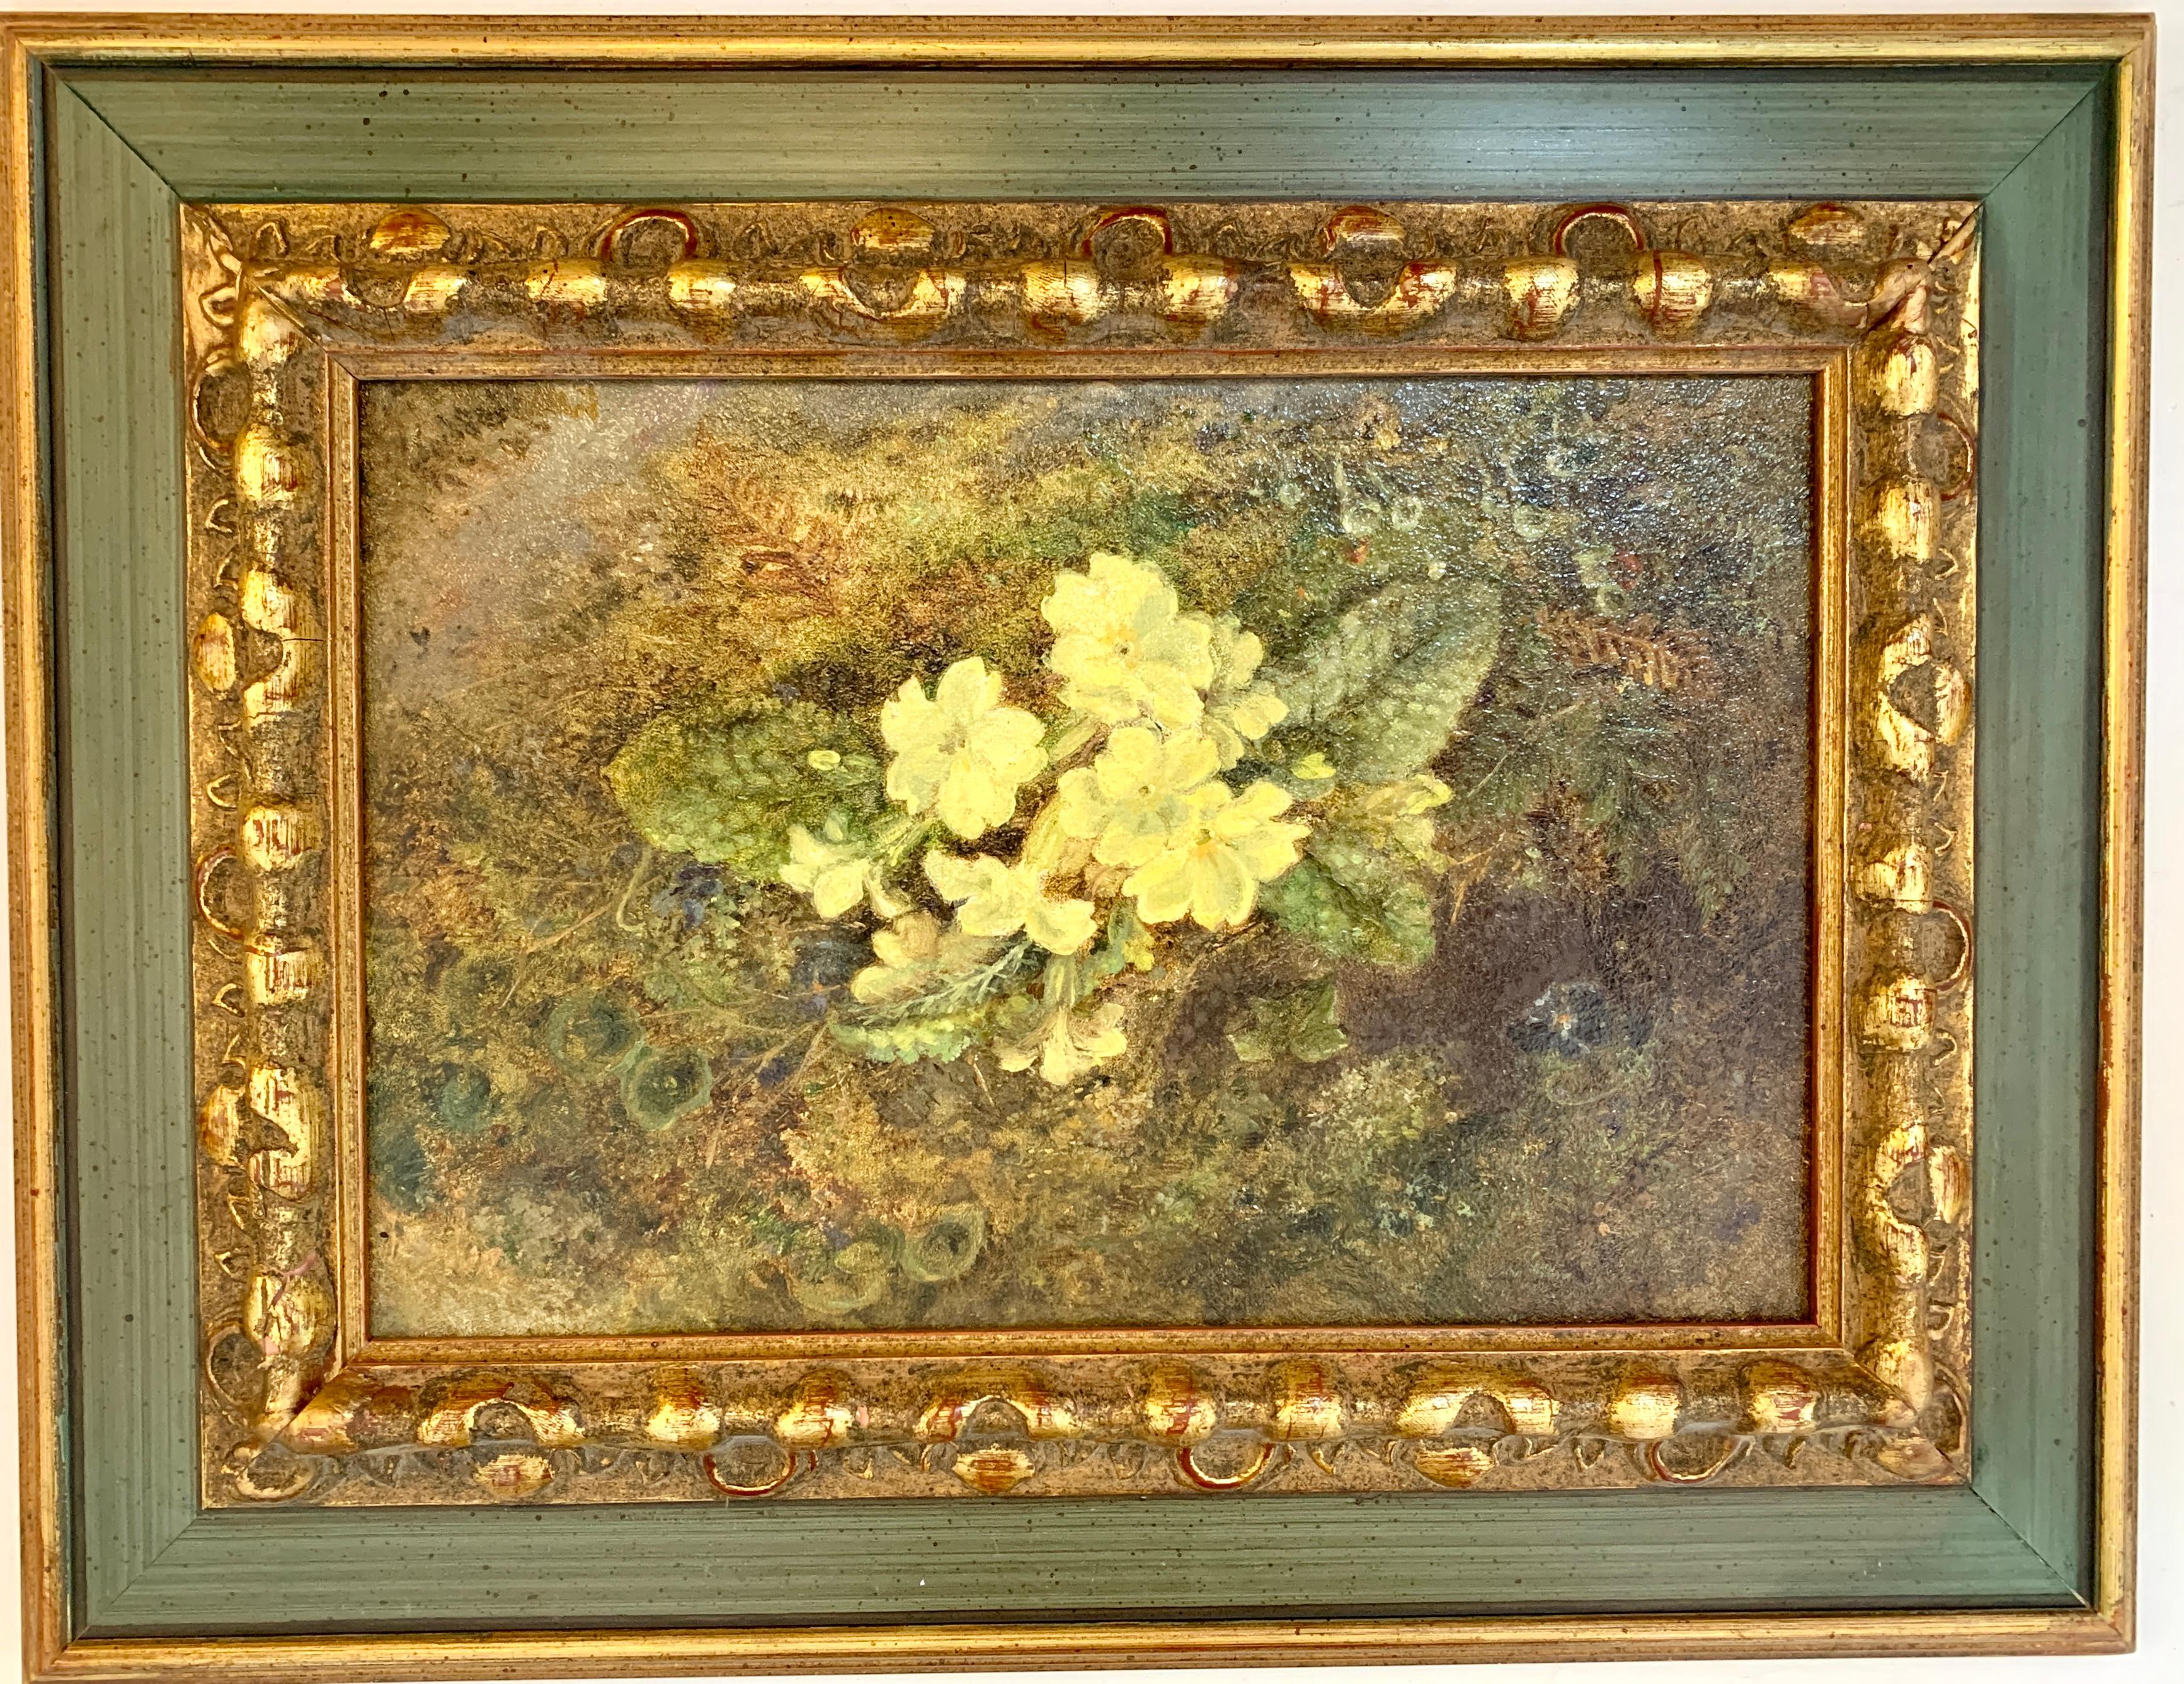 S.A Bridges Still-Life Painting - 19th century English Victorian still life of yellow Violets in a landscape